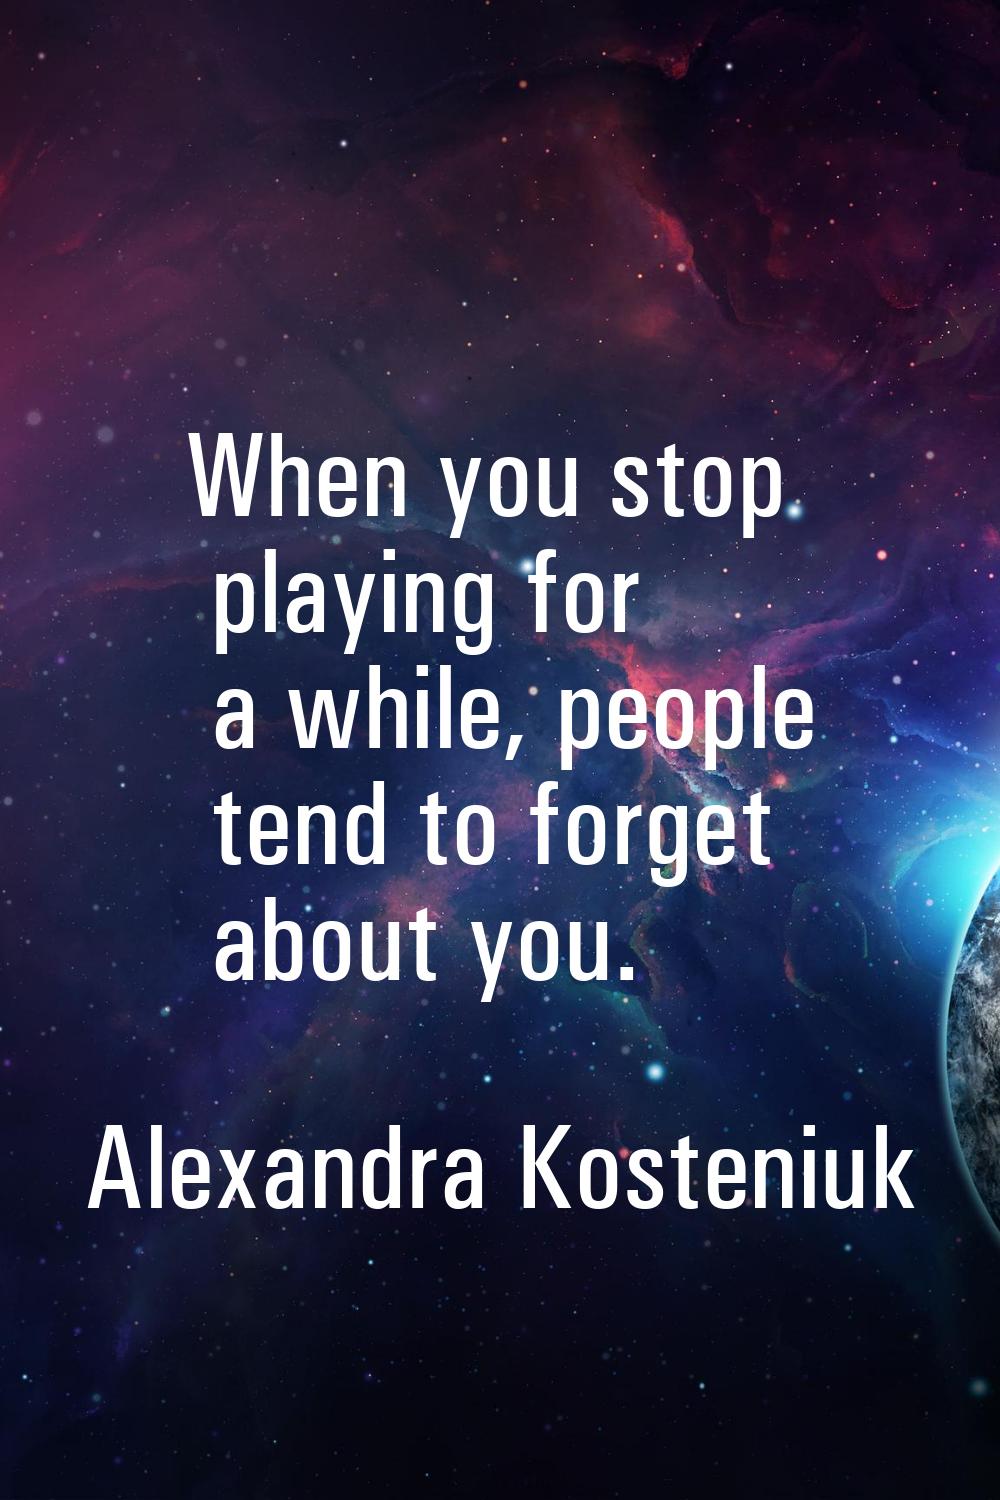 When you stop playing for a while, people tend to forget about you.